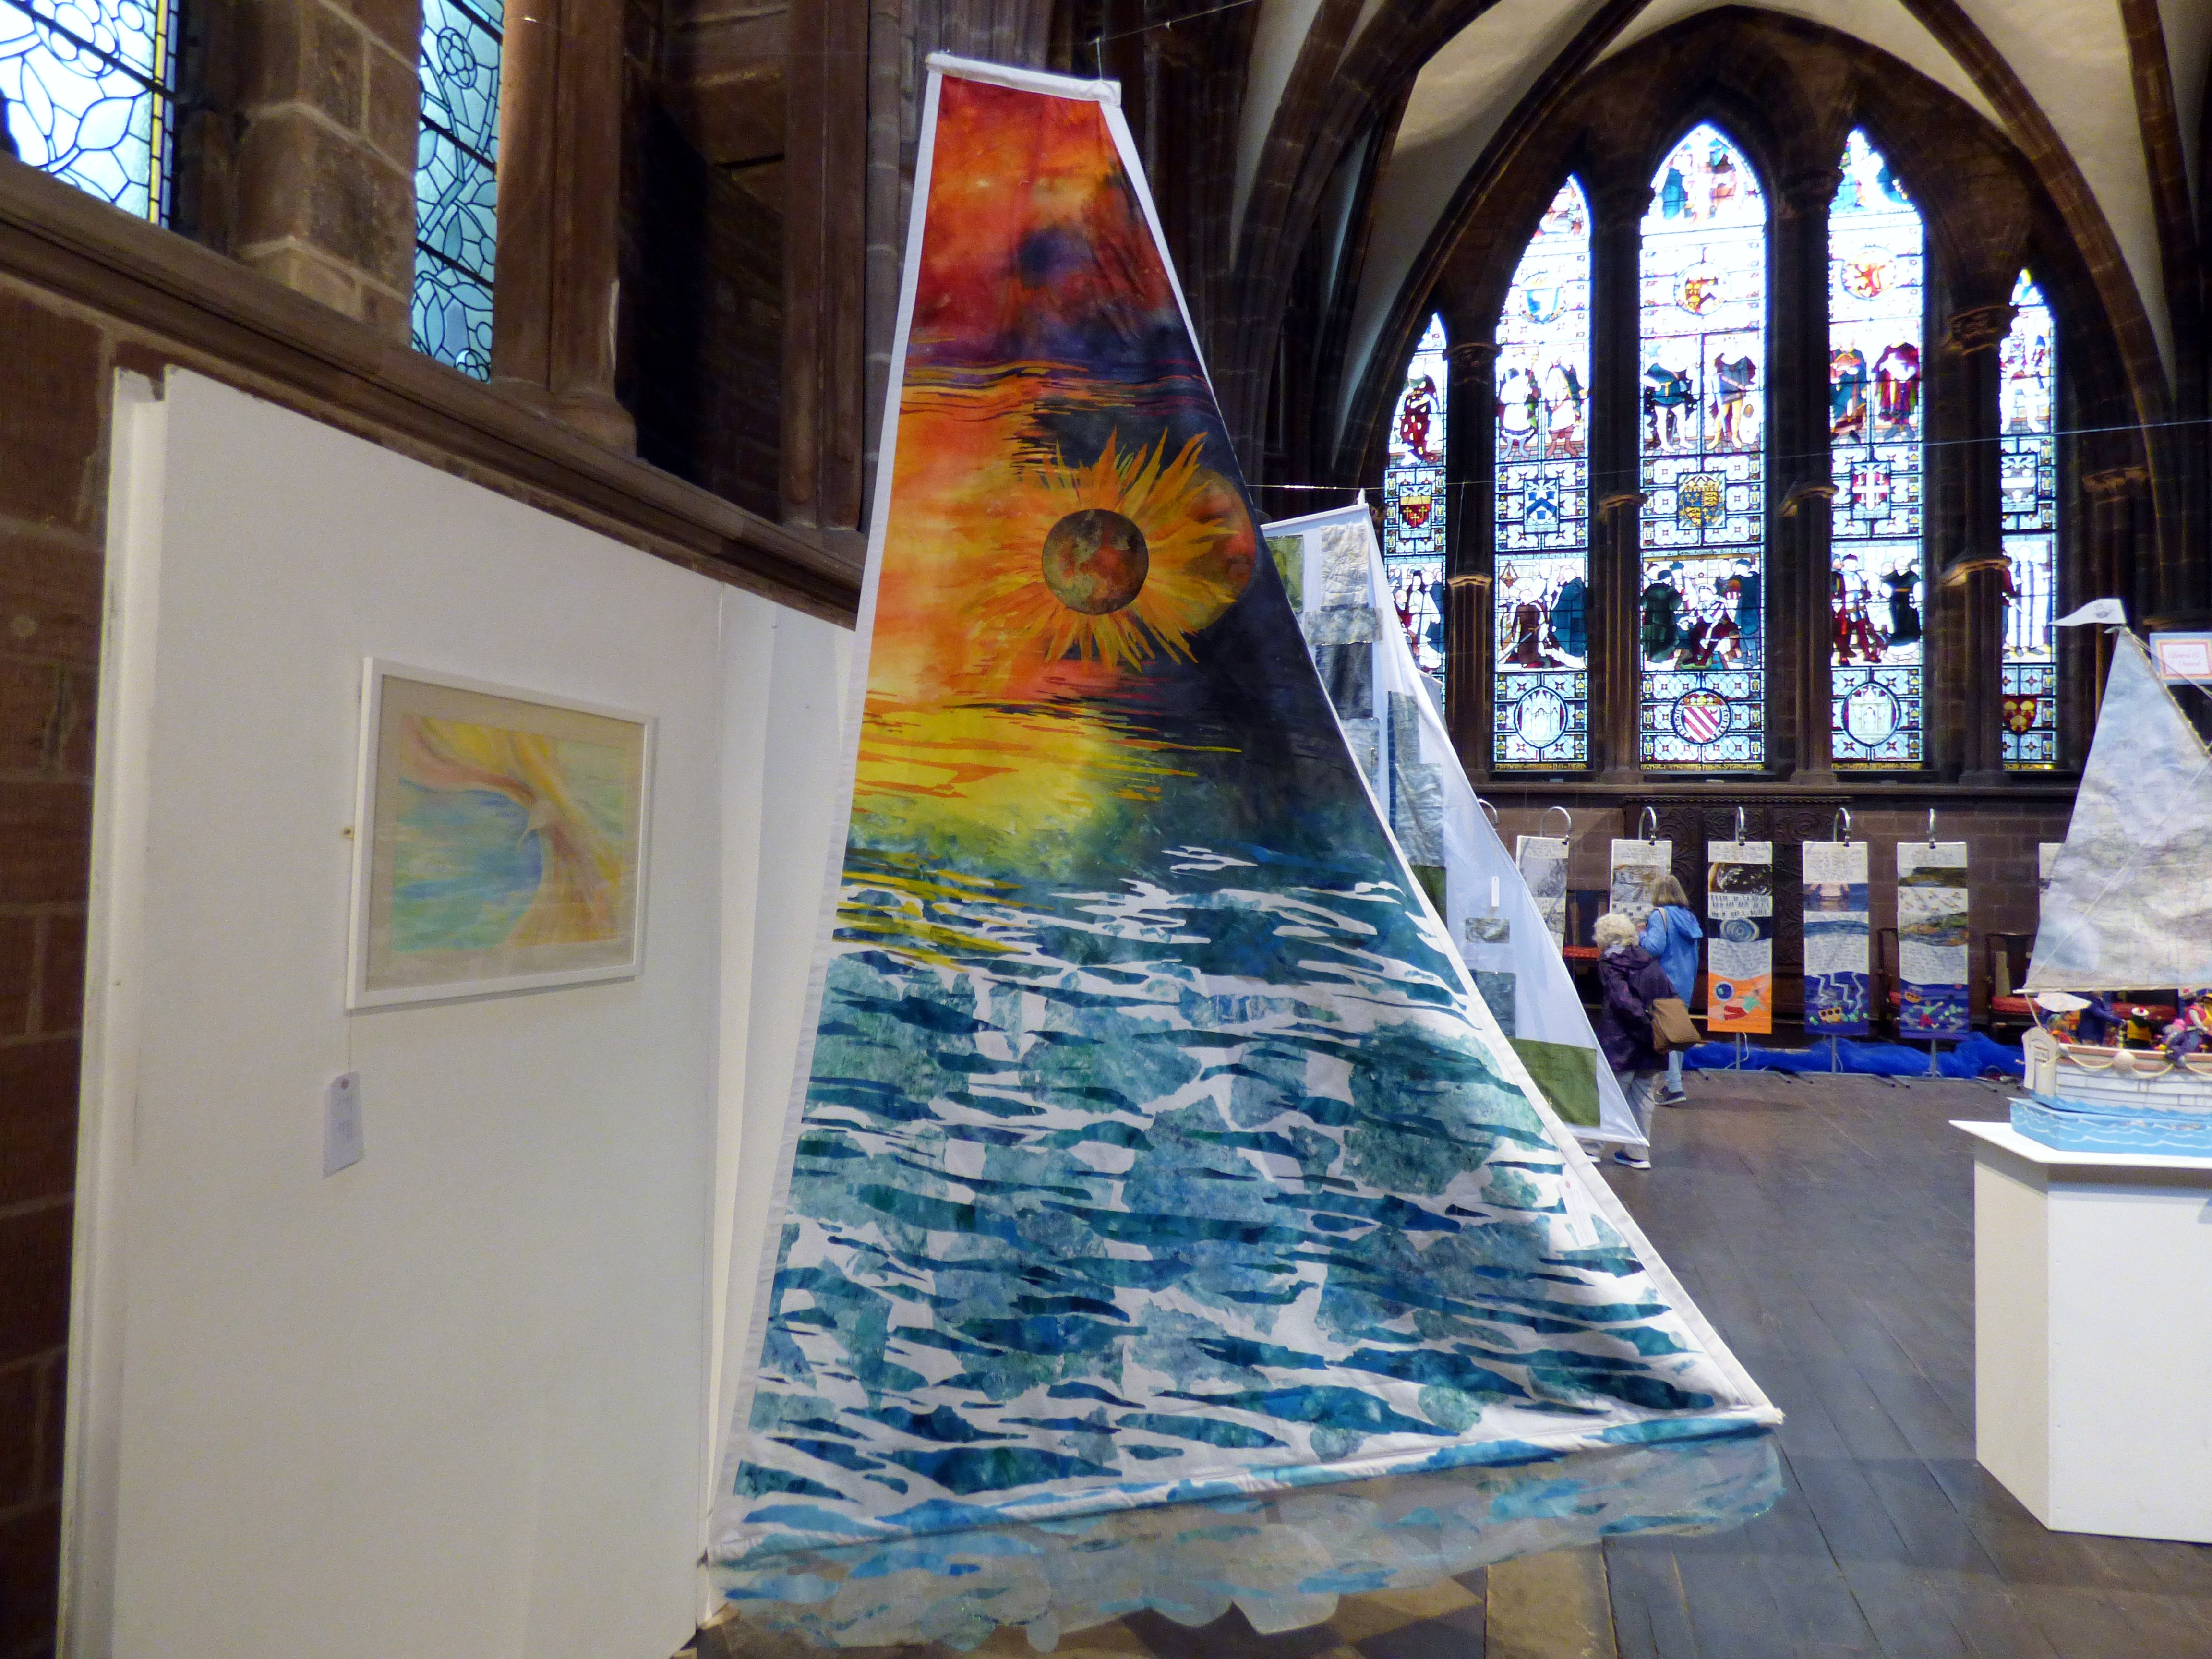 ON THE EDGE OF A NEW BEGINNING by Susan Darby, machine stitched chiffon and organza, mixed media, Textile 21, Chester cathedral 2019